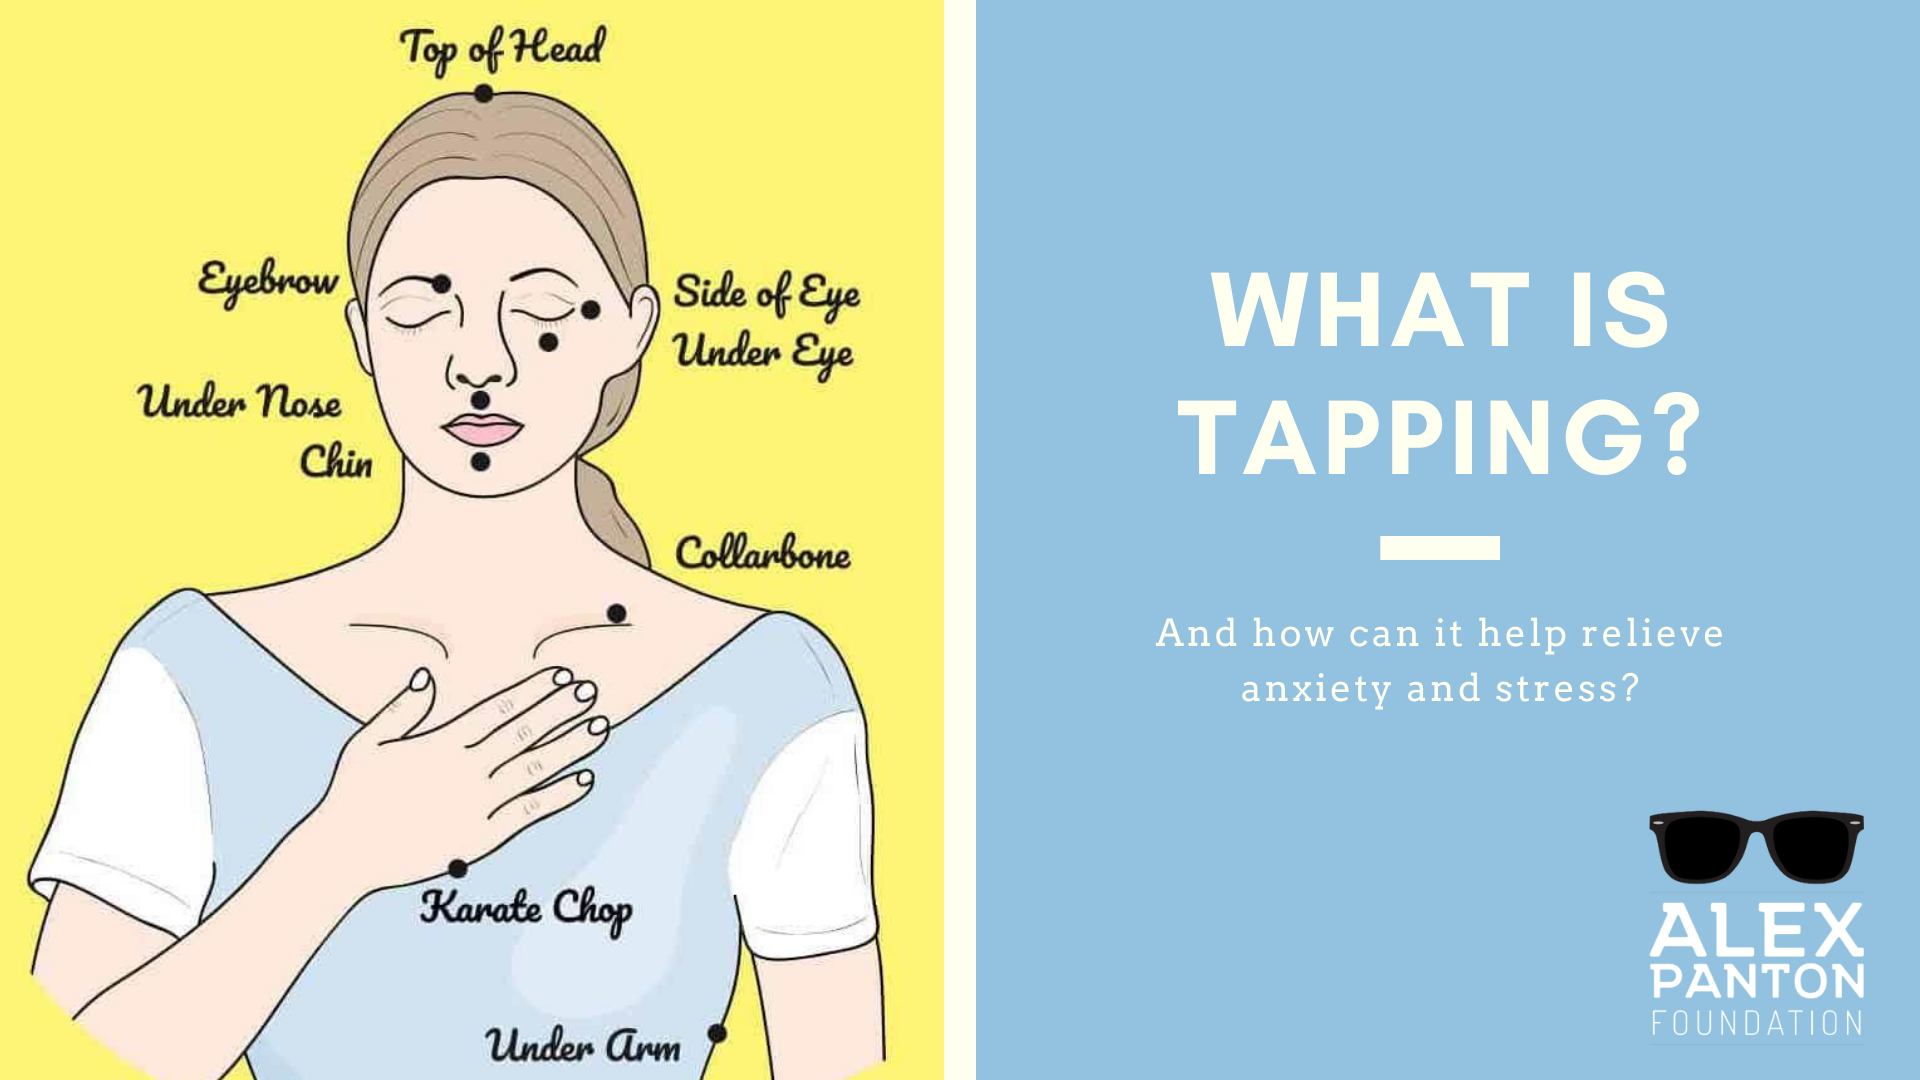 What is tapping and how can it relieve stress and anxiety?